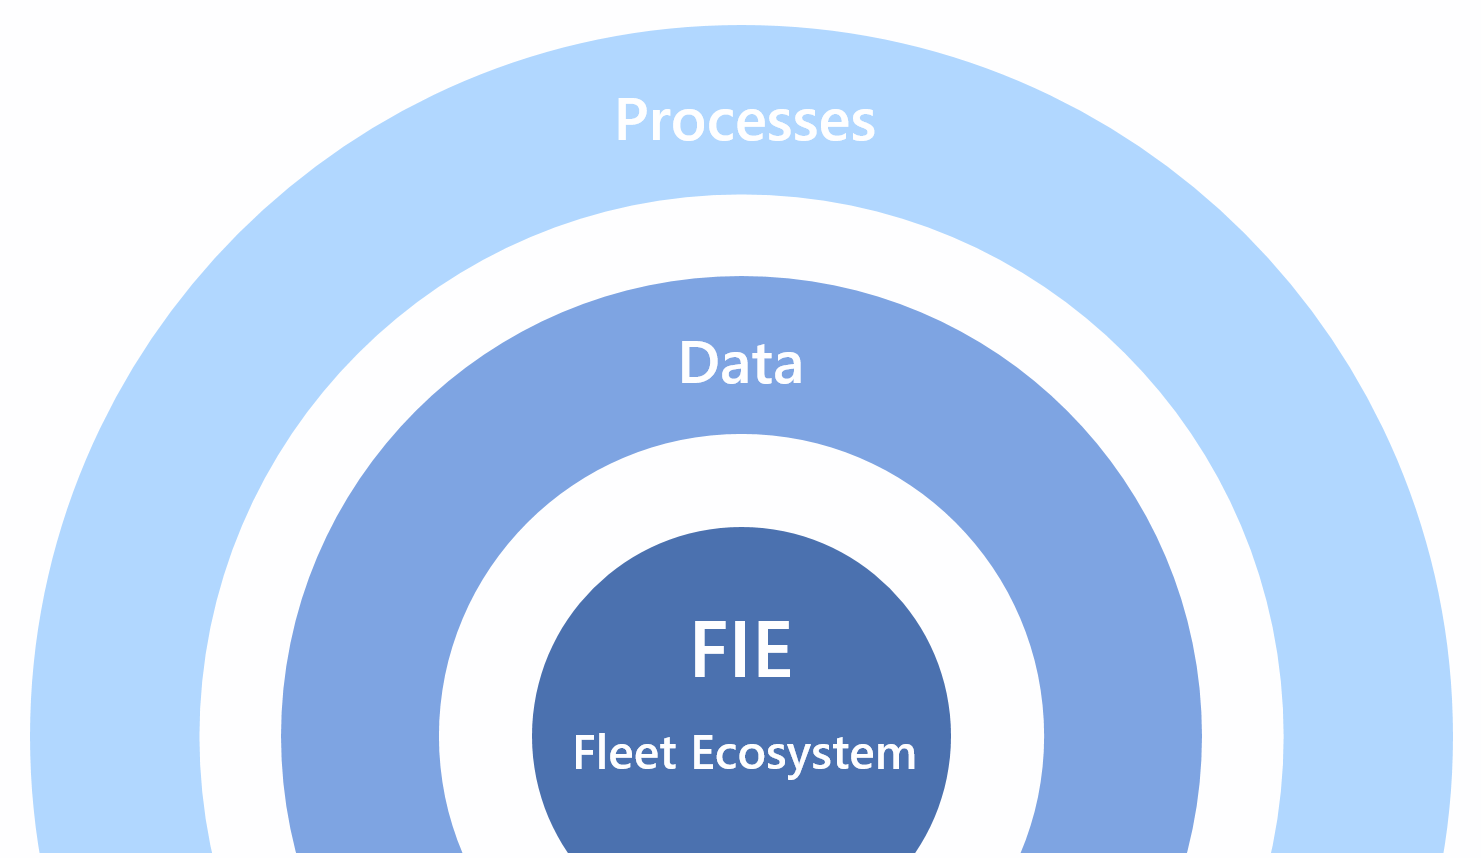 FIE Ecosystem - Fleet and Mobility